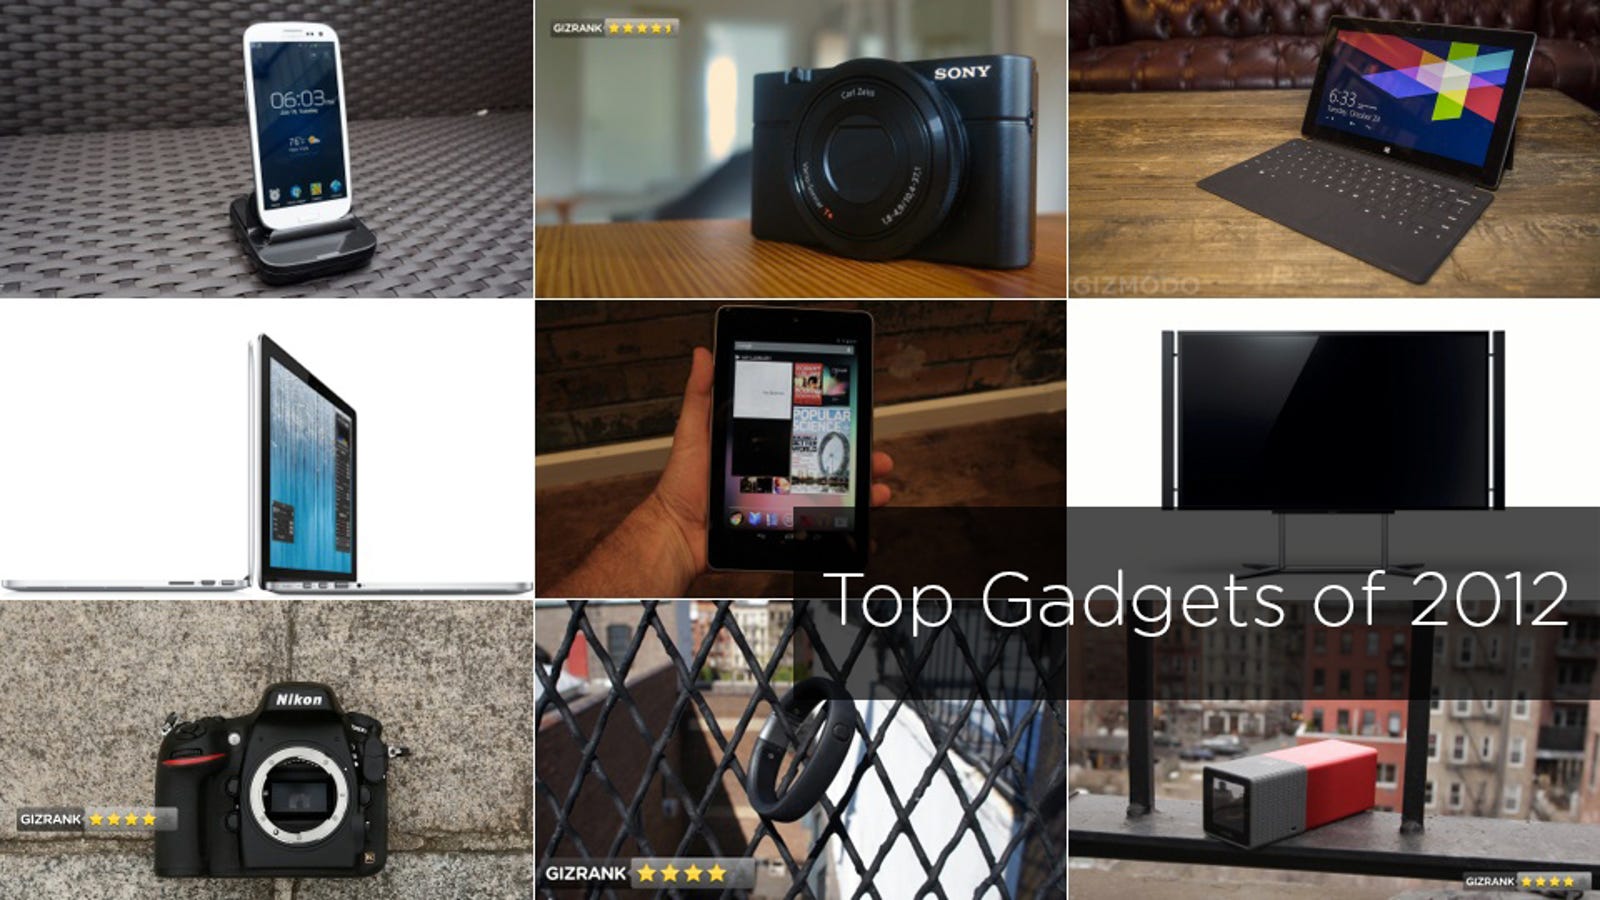 The 10 Most Important Gadgets of 2012